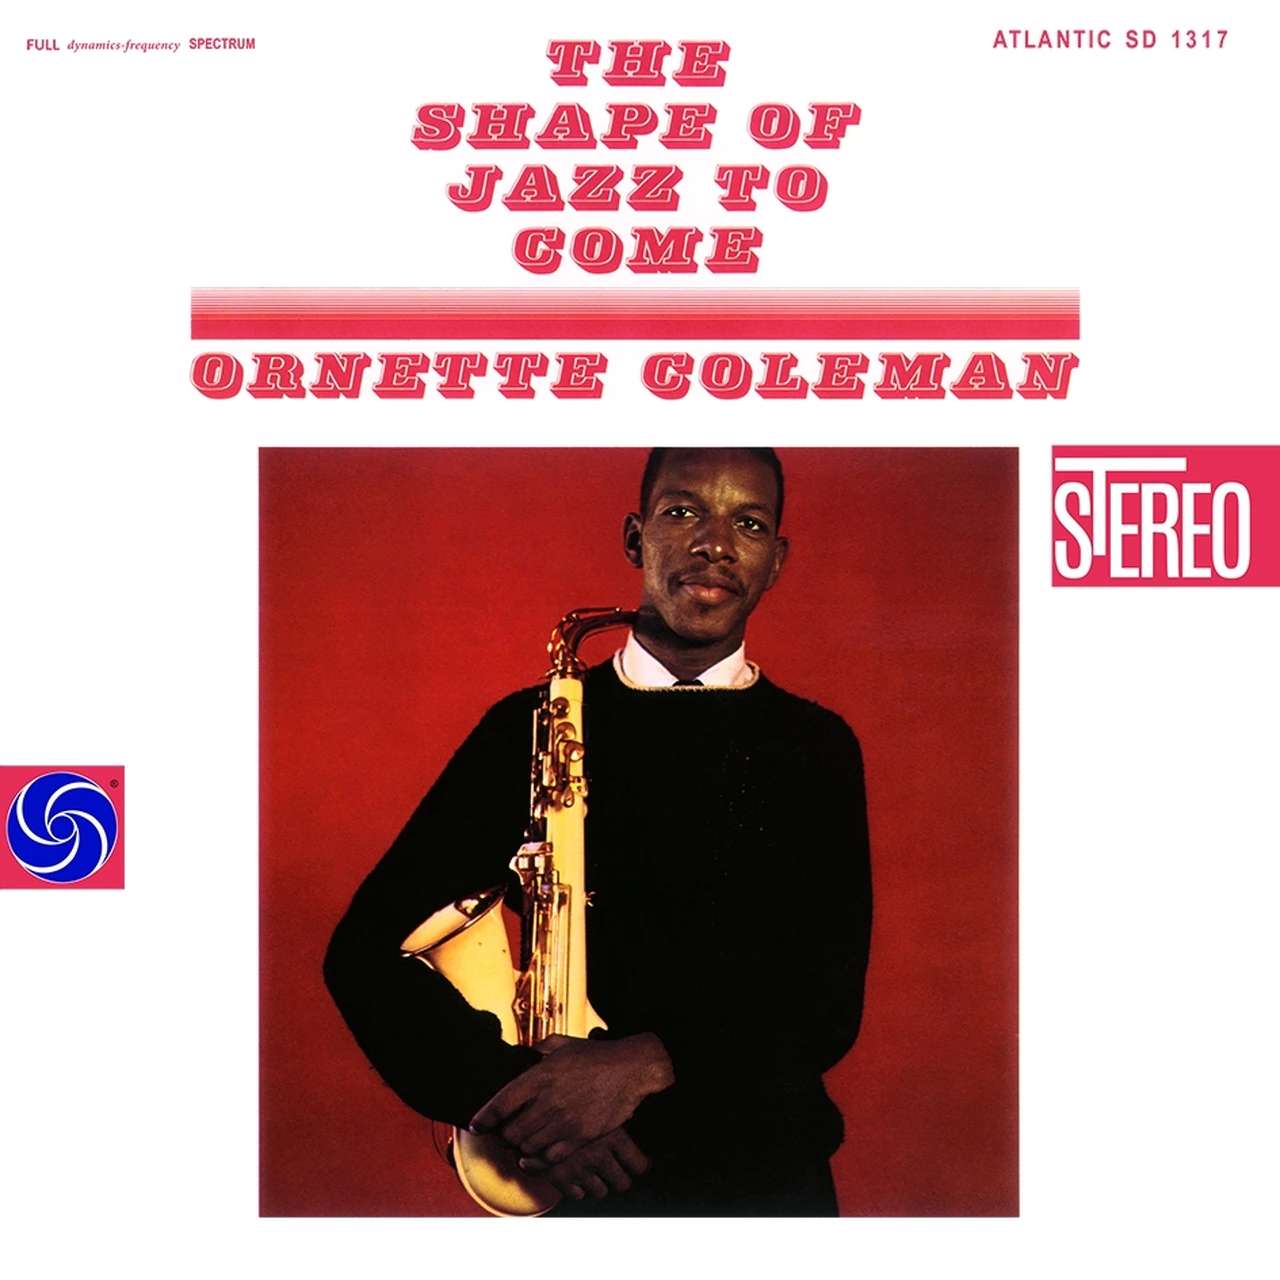 Ornette Coleman - Shape of Jazz to Come - 33RPM